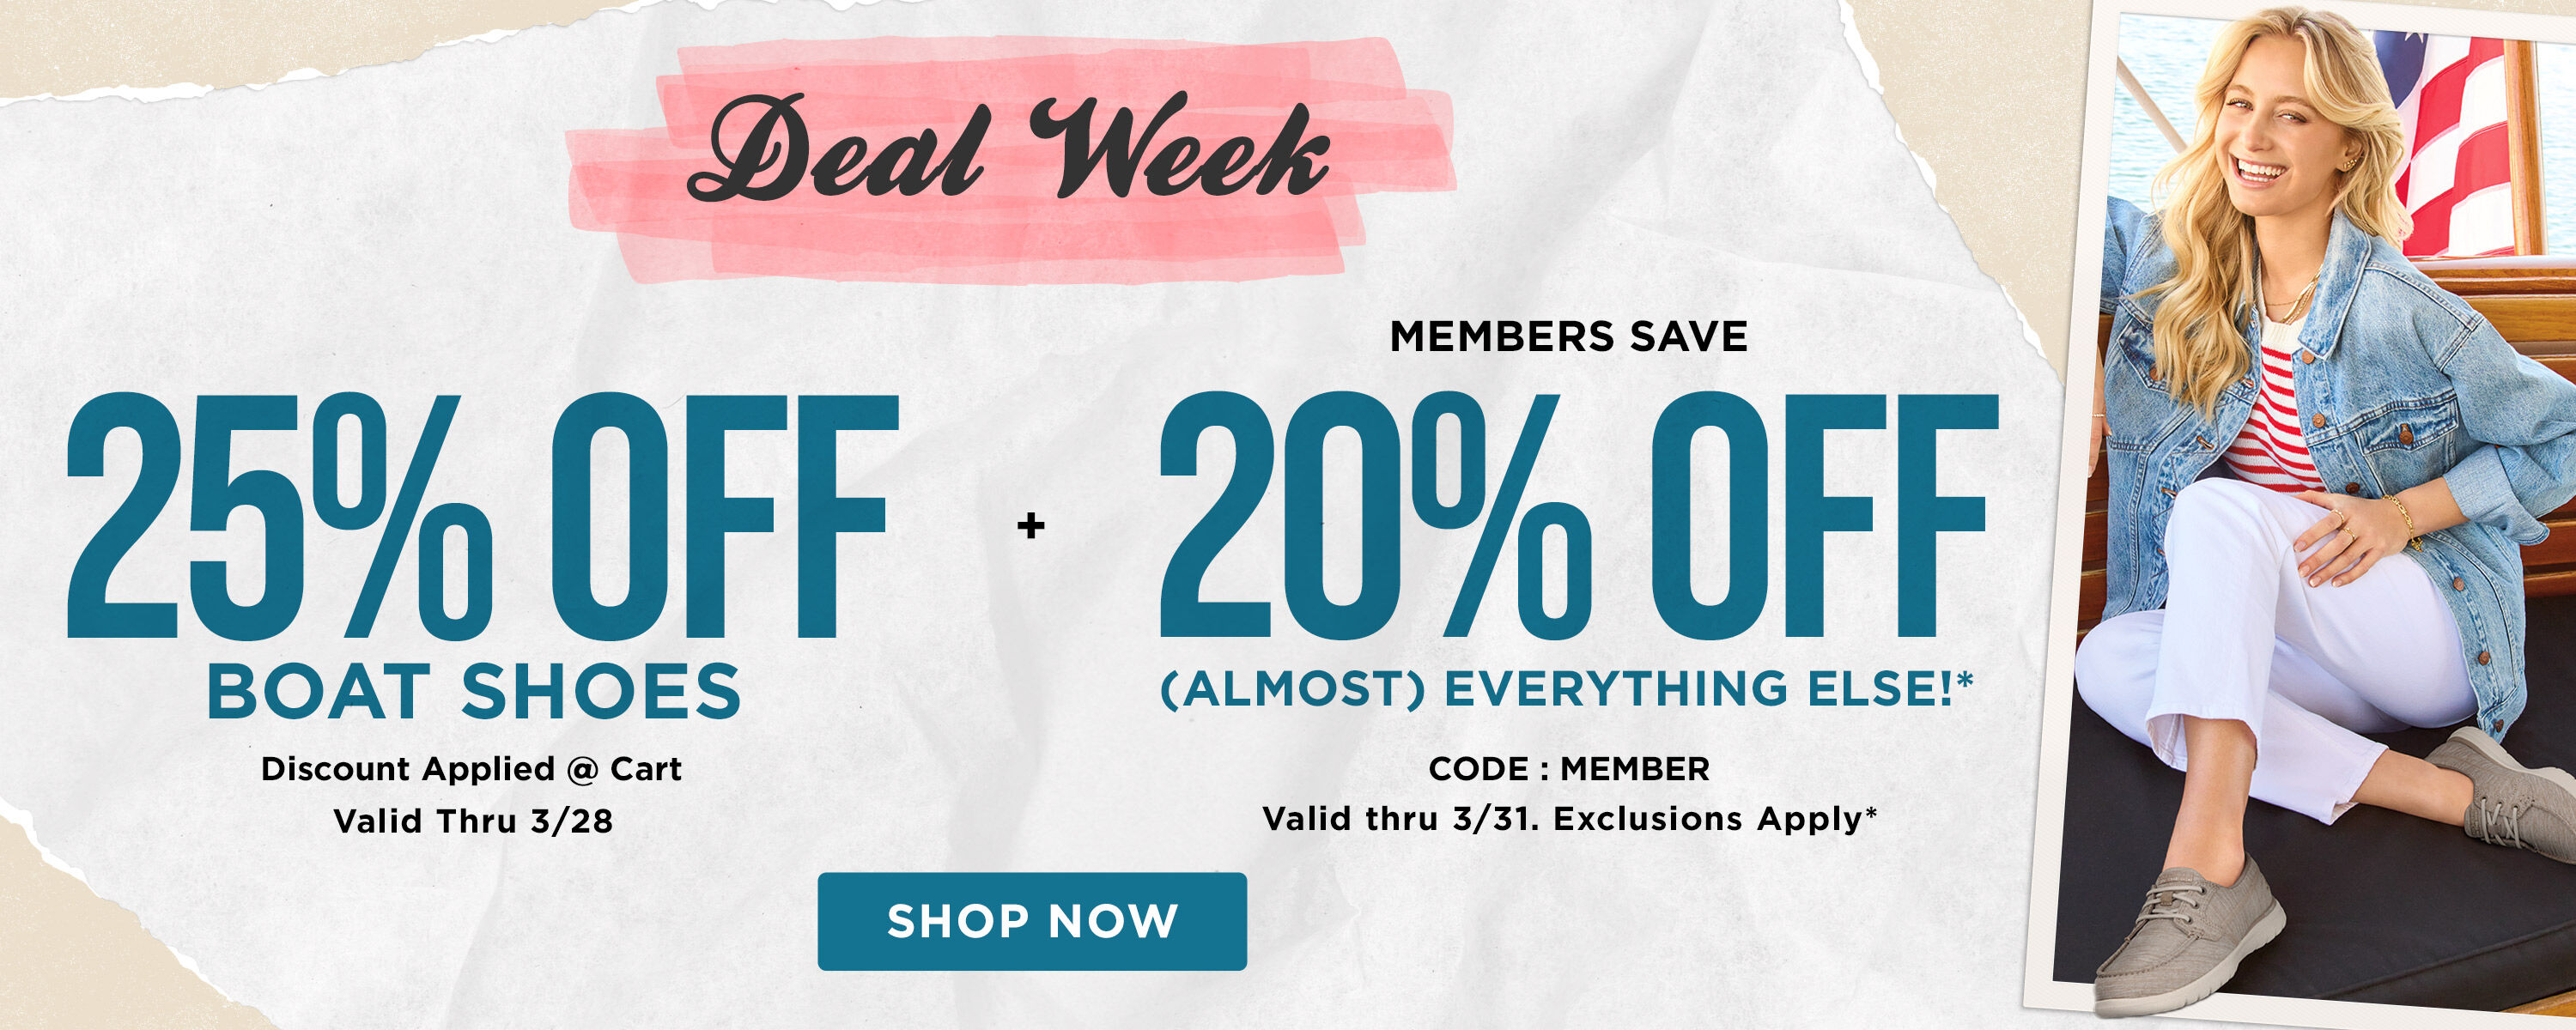 Deal Week: 25% off boat shoes & 20% off almost everything else ~ SHOP NOW